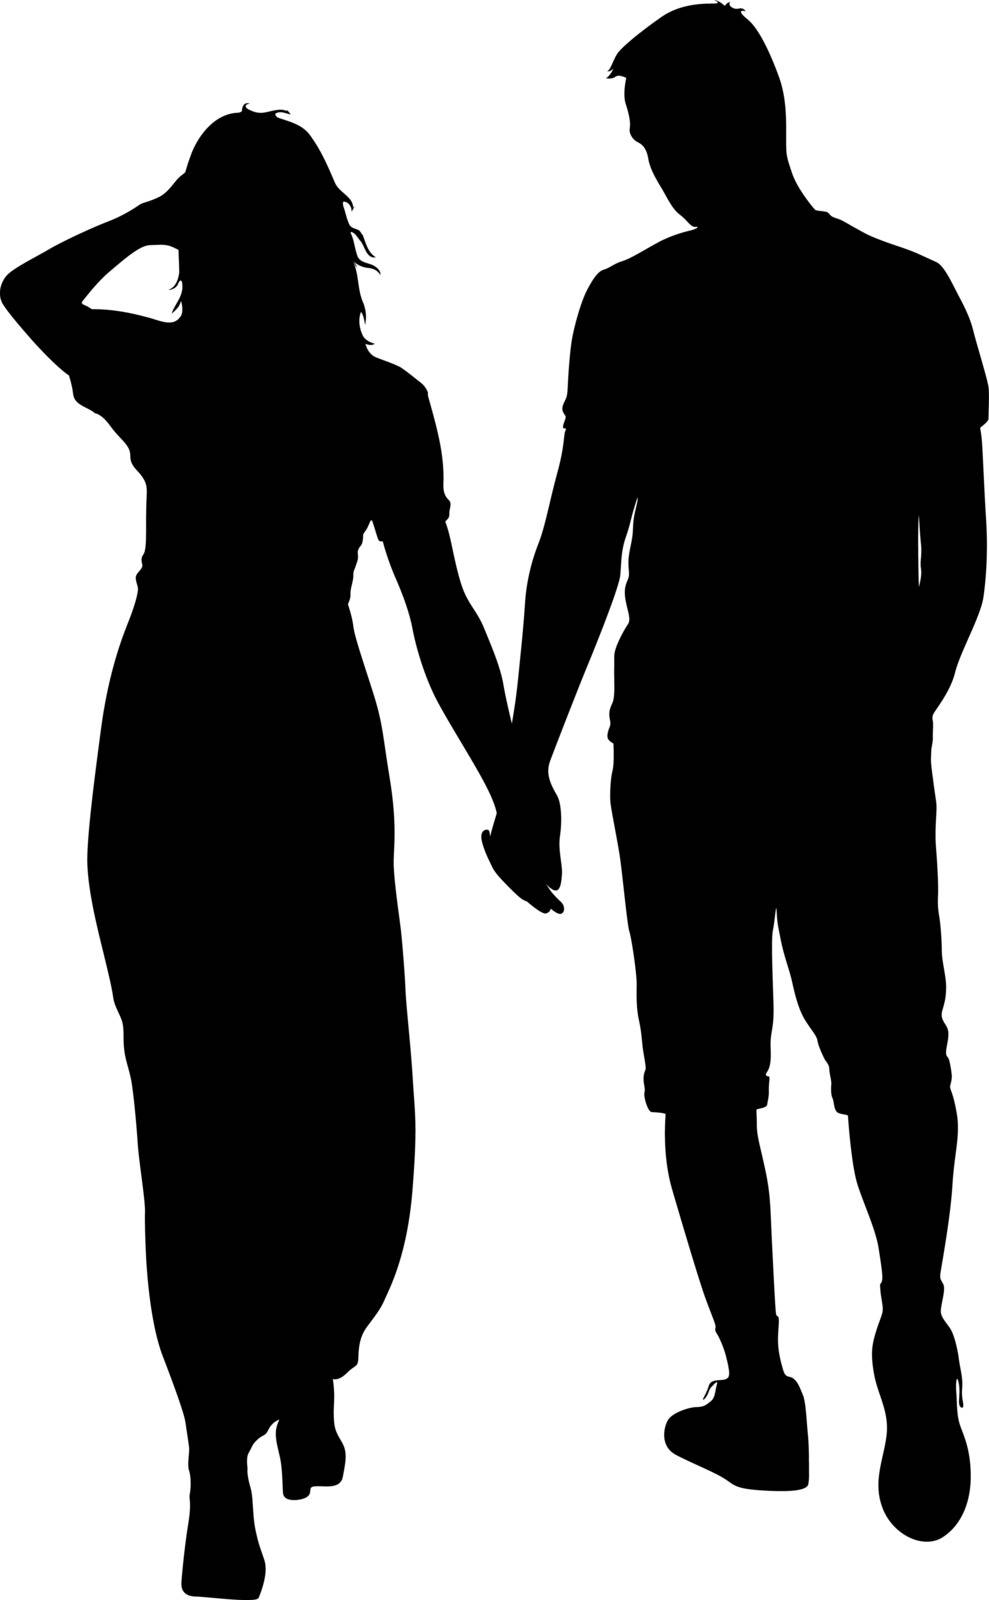 Silhouette man and woman walking hand in hand by aarrows